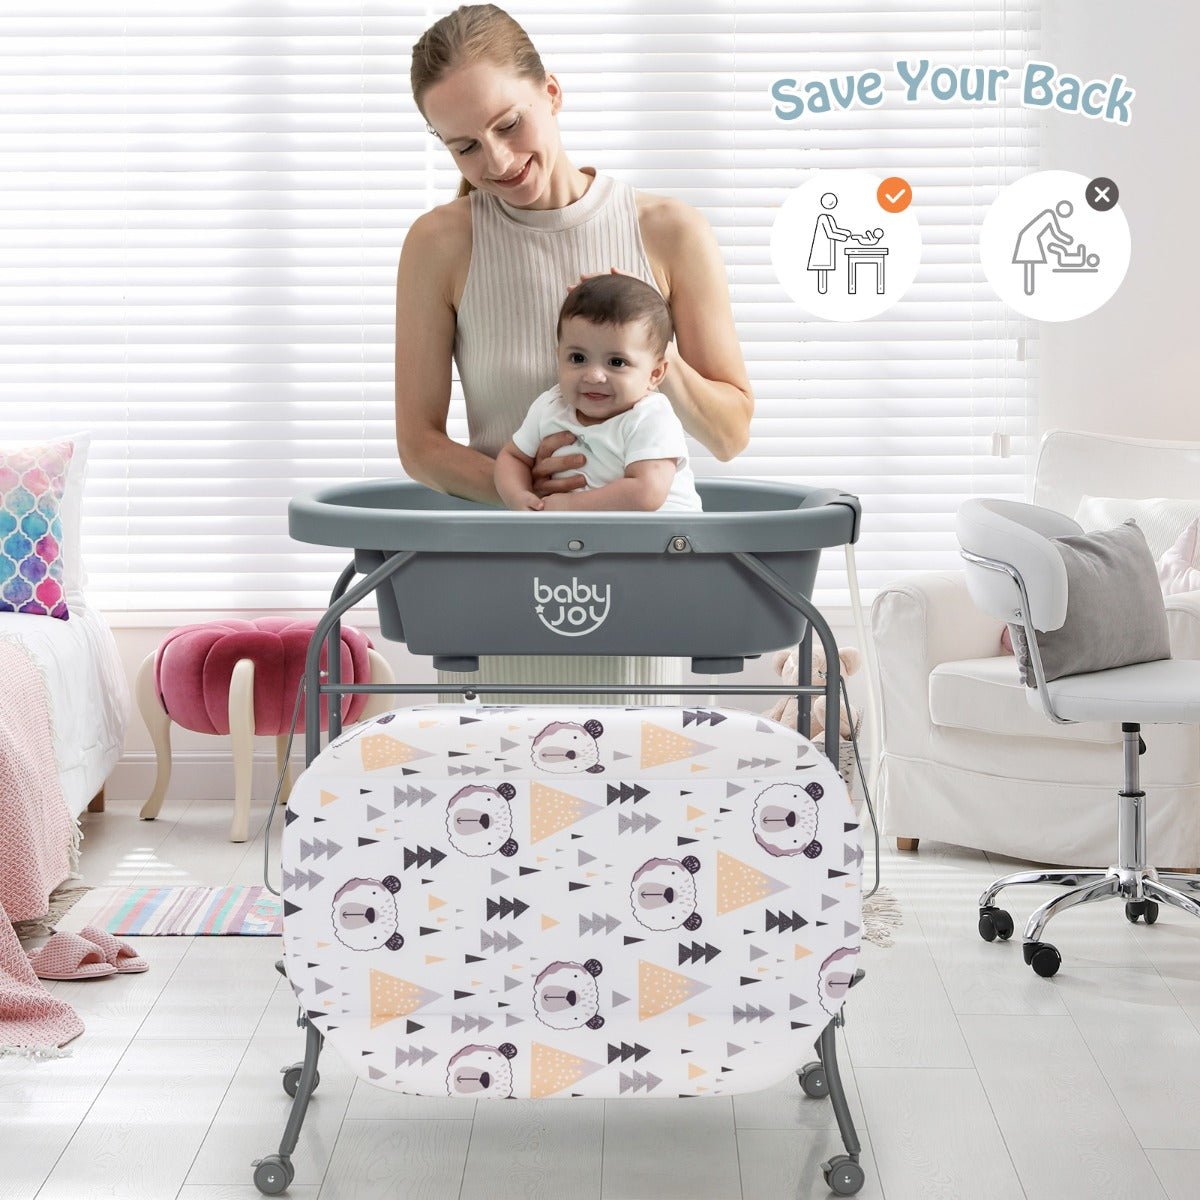 Buy the Ultimate Grey Portable Baby Changing Table for Baby's Comfort